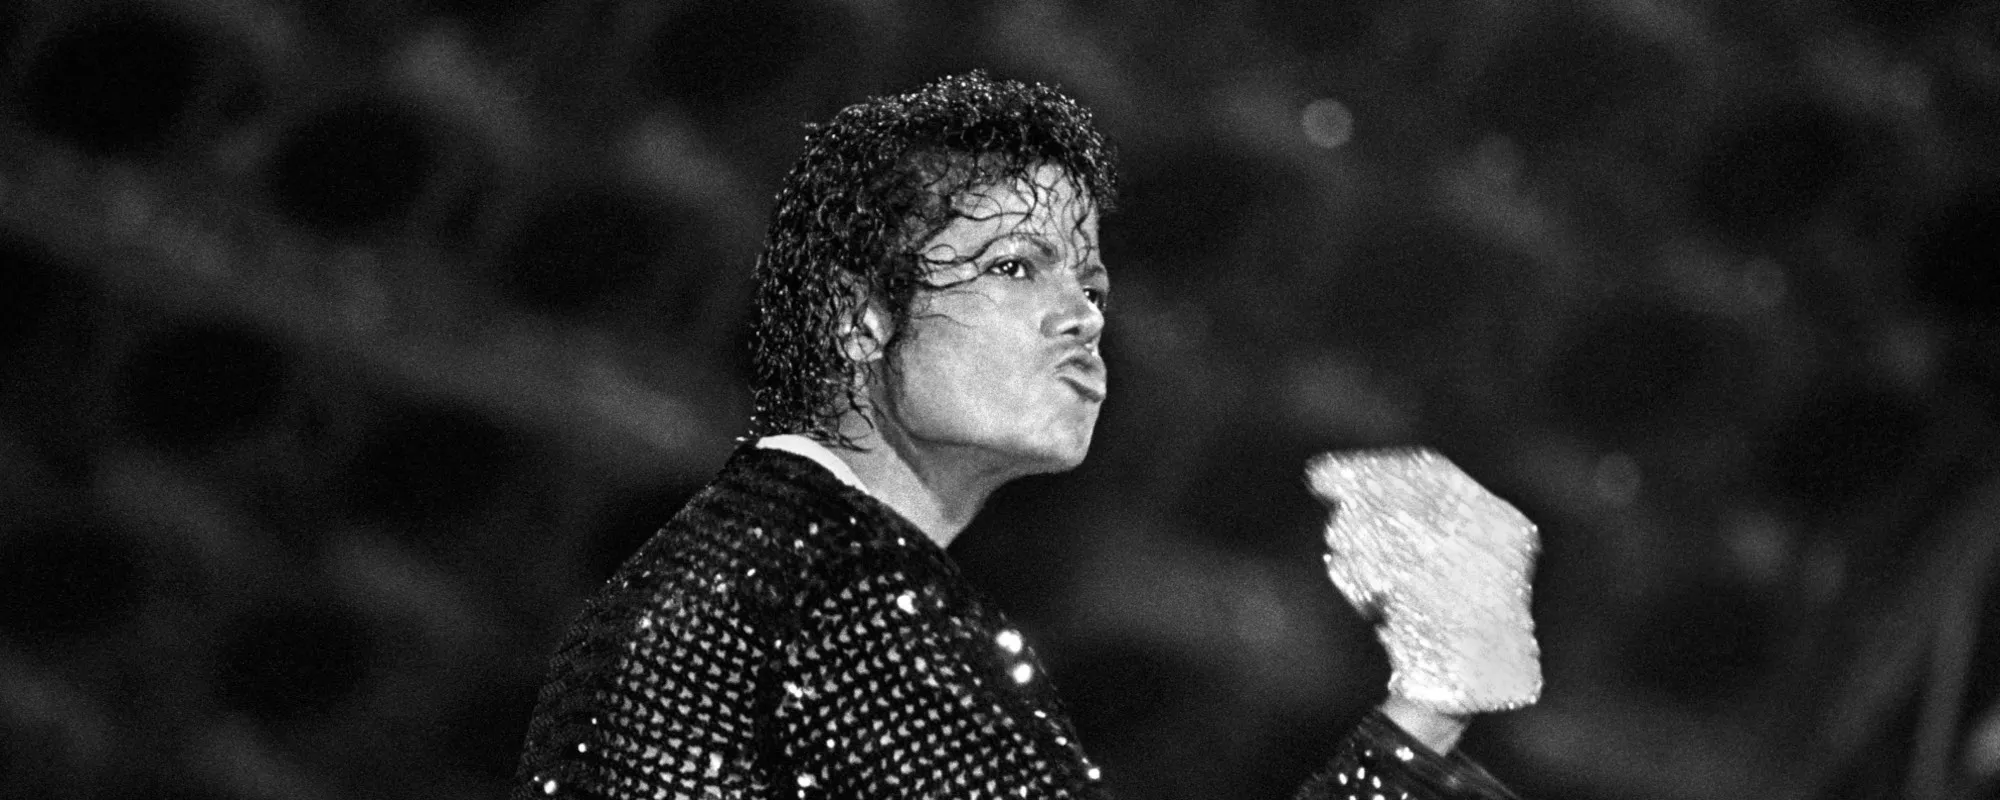 The Meaning Behind Michael Jackson’s 1983 Classic “Beat It”